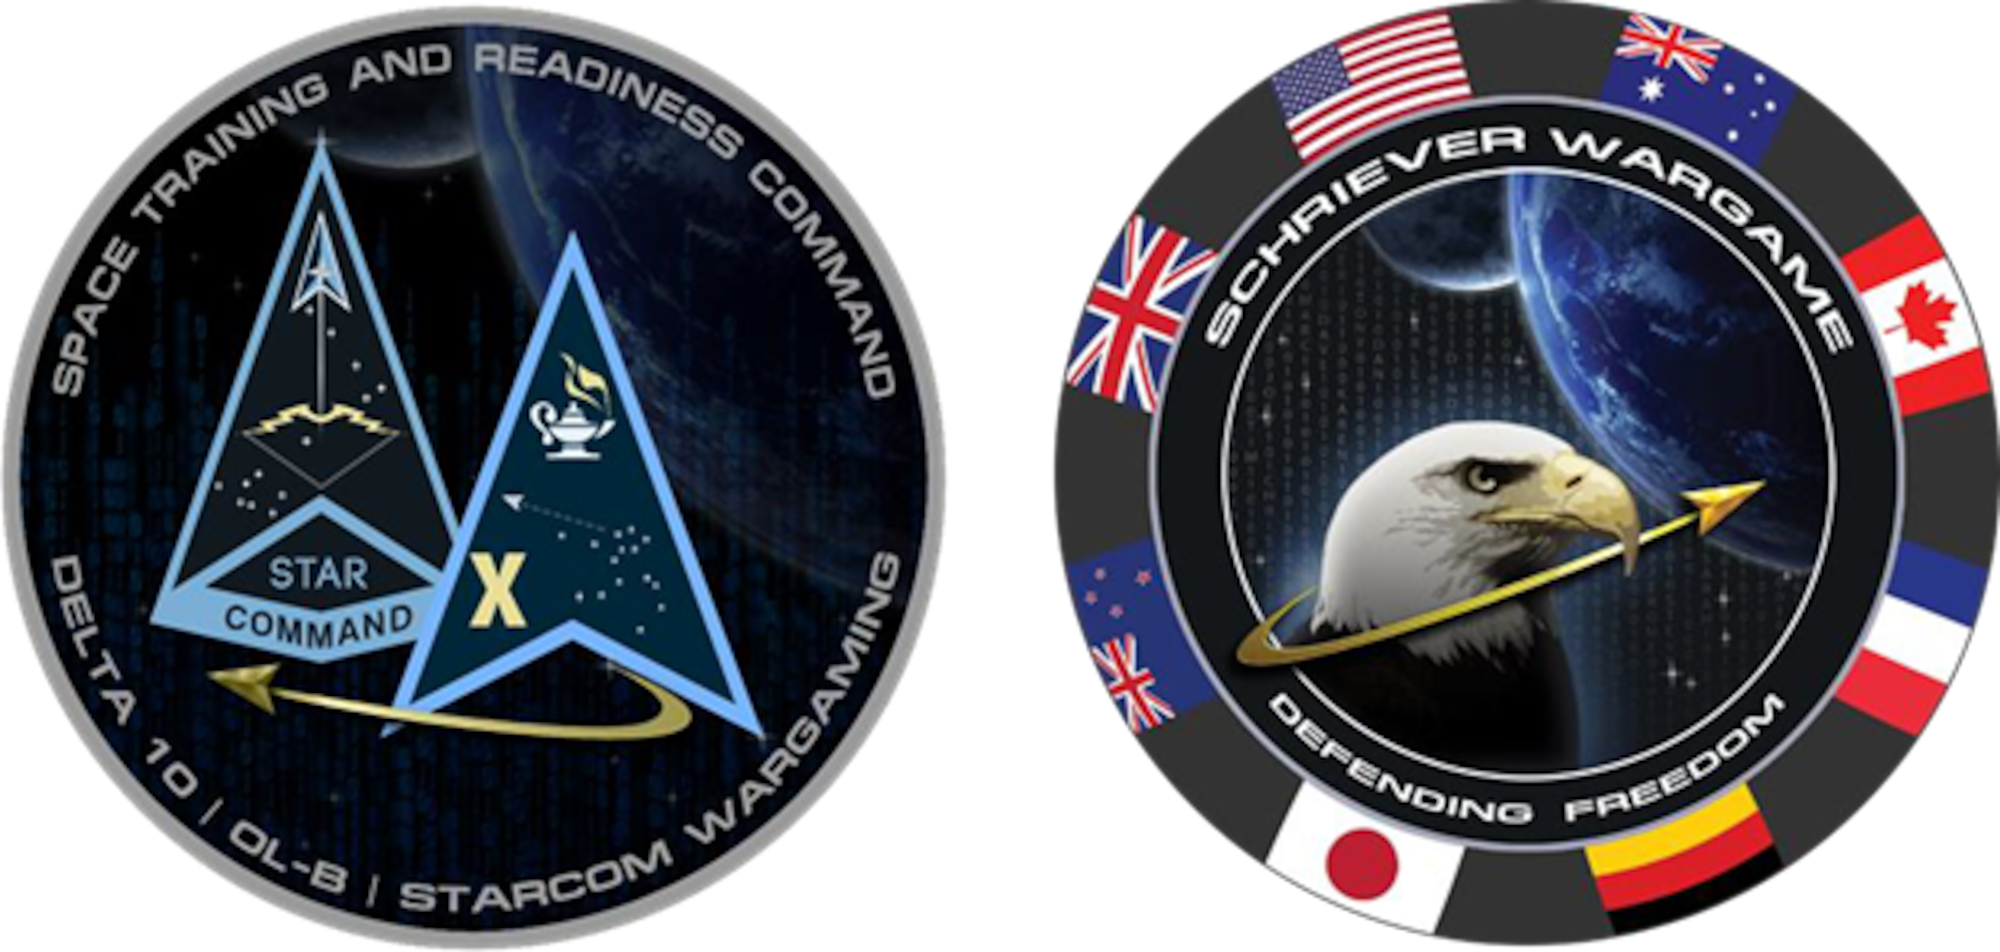 Space Training and Readiness Command (STARCOM) will conduct the sixteenth Schriever Wargame at Maxwell Air Force Base, Alabama starting March 20, 2023. The Schriever Wargame scenario, set in the year 2033, will explore critical space issues and investigate the integration activities of multiple agencies associated with space systems and services within a multi-domain environment. Schriever Wargame 2023 (SW 23) will include international partners from Australia, Canada, France, Germany, Japan, New Zealand, and the United Kingdom.